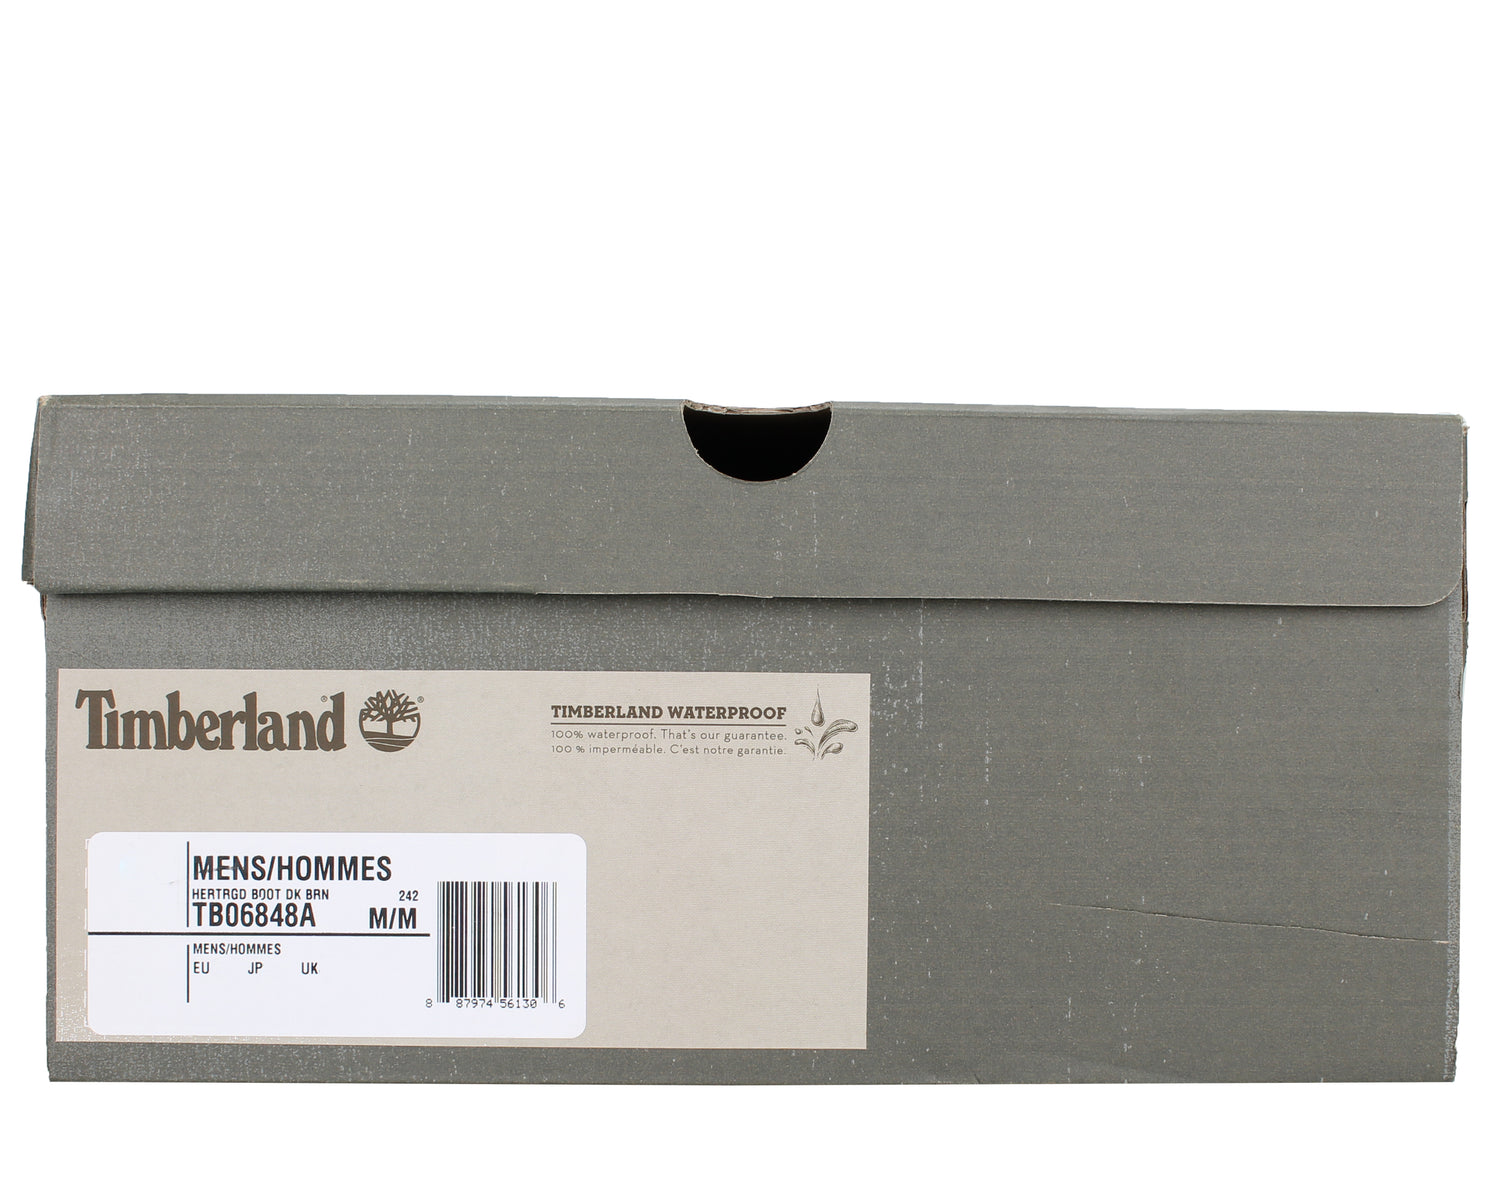 Timberland Heritage Rugged 6-Inch Waterproof Men's Boots